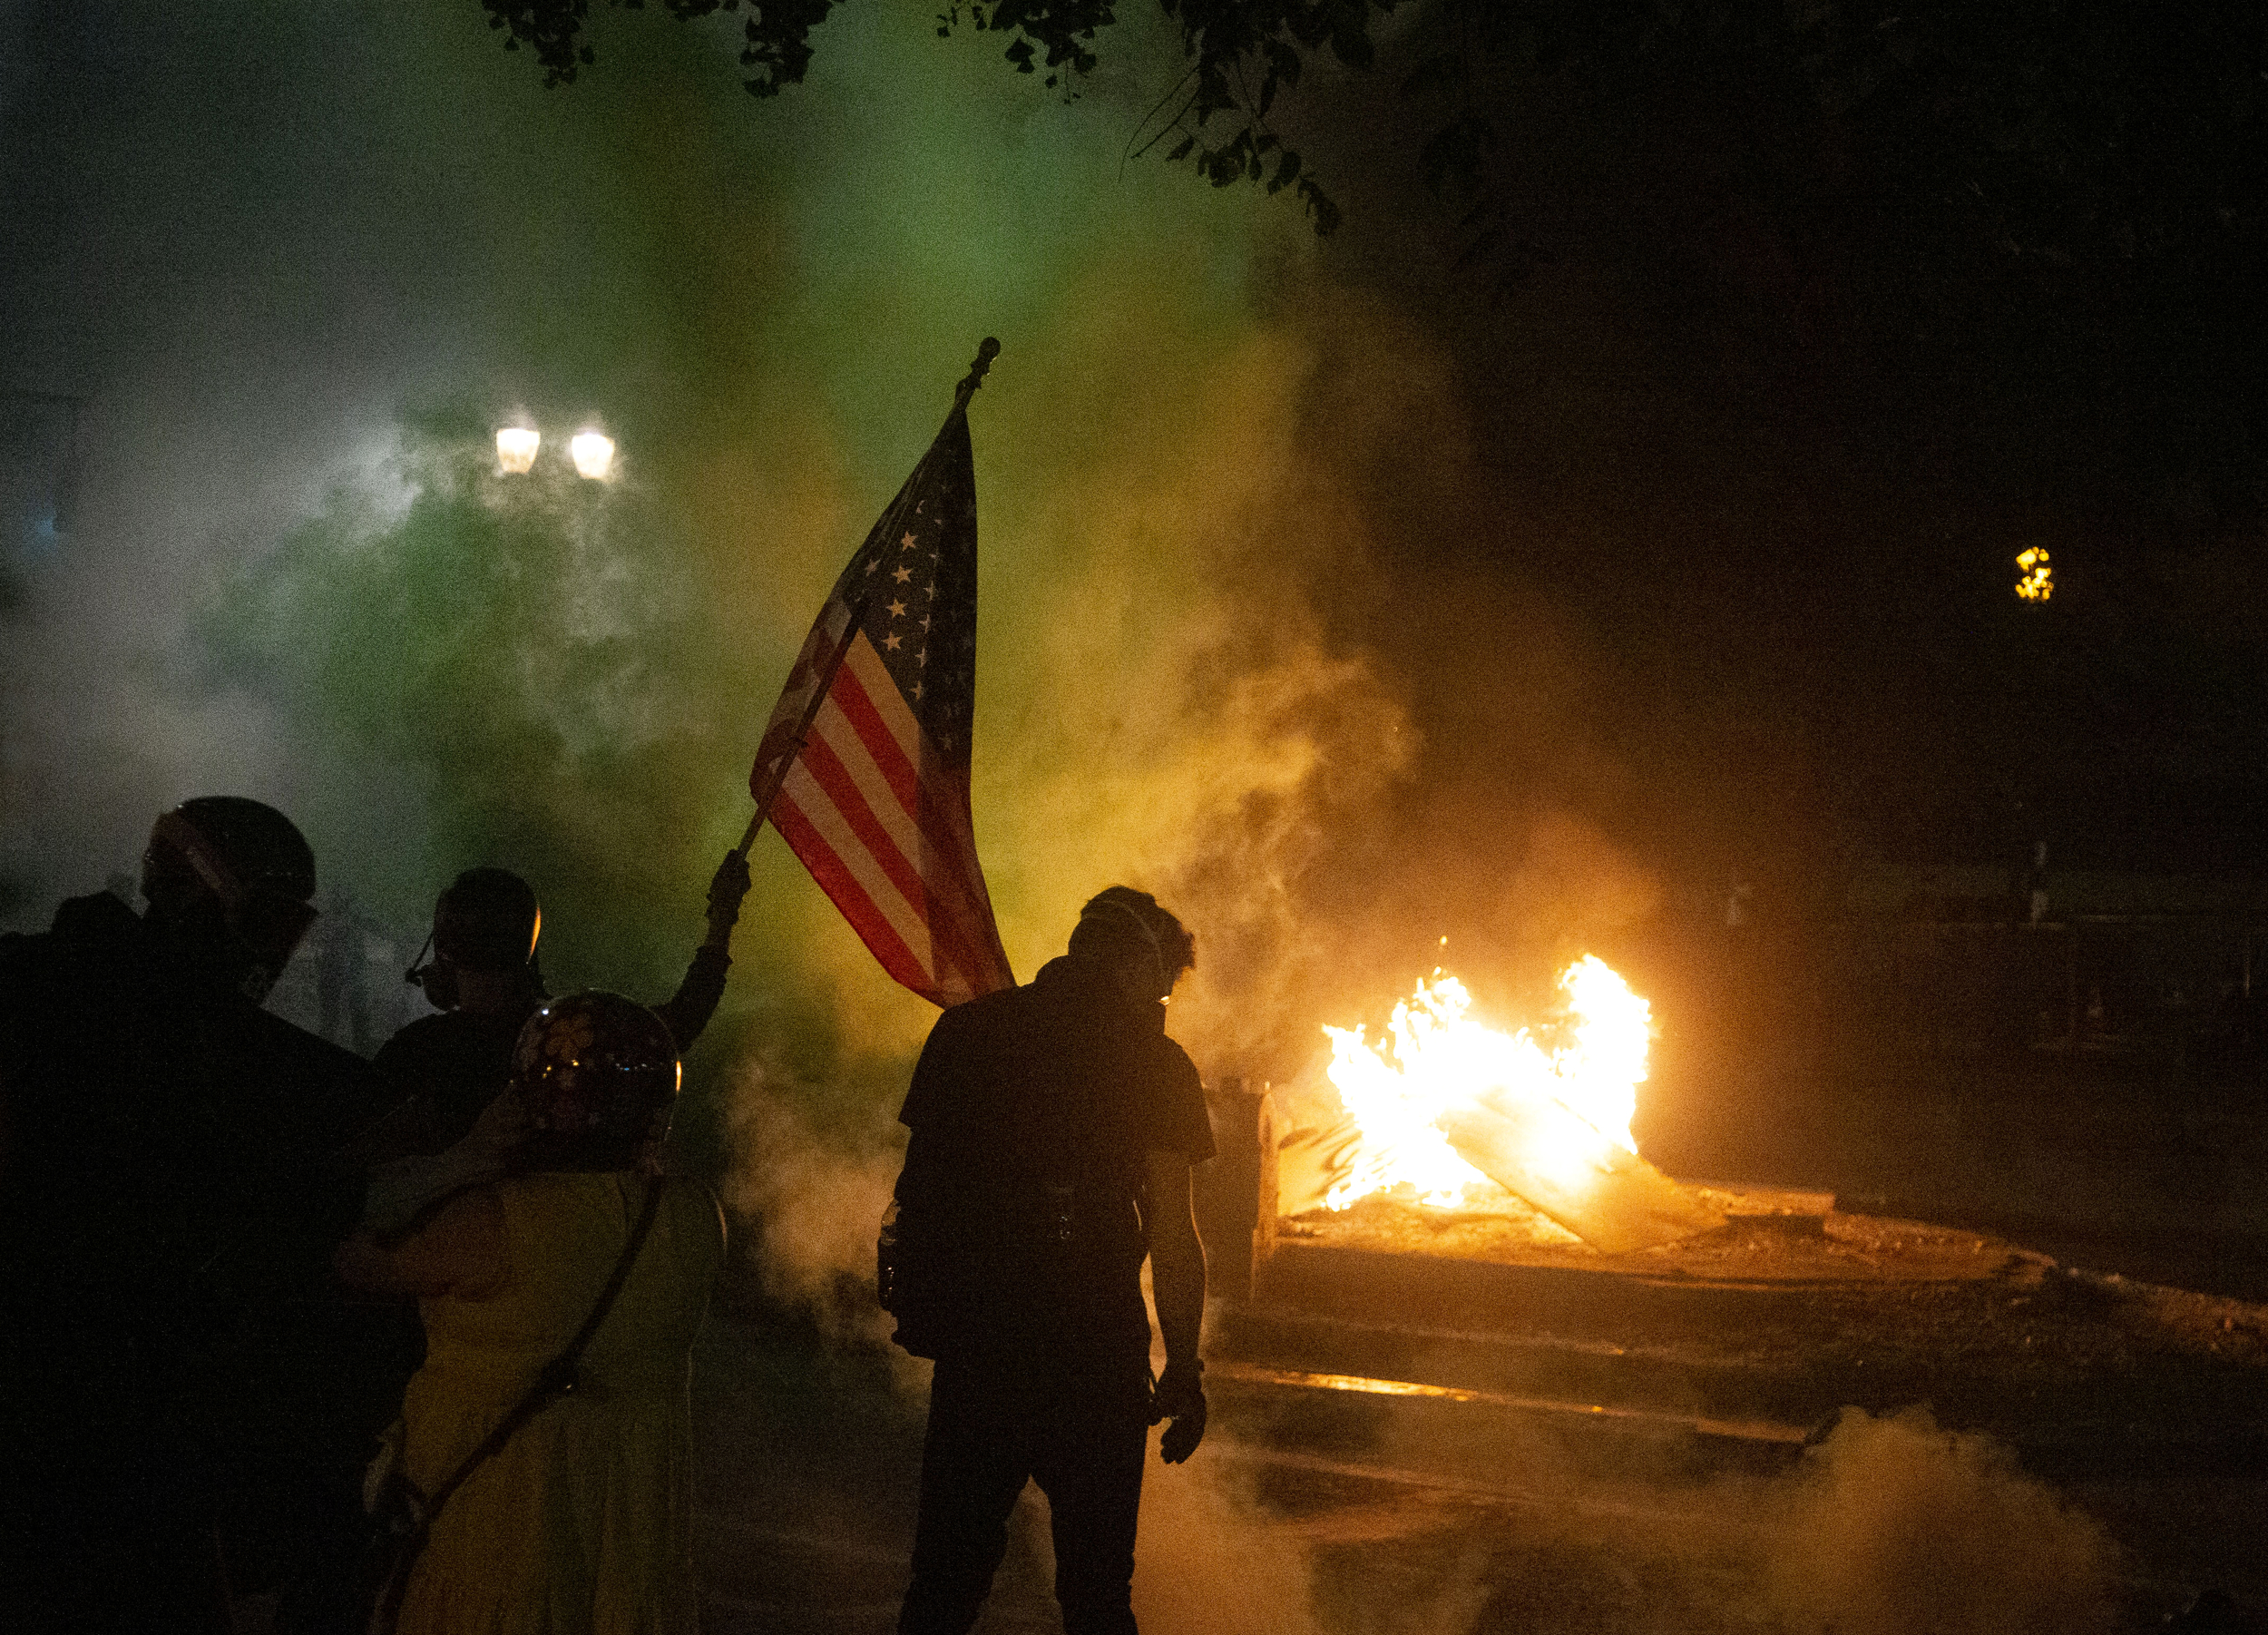 Tear gas and crowd munitions were deployed by federal police on the 54th night of protests in Portland, Oregon. July 20, 2020 Beth Nakamura/Staff